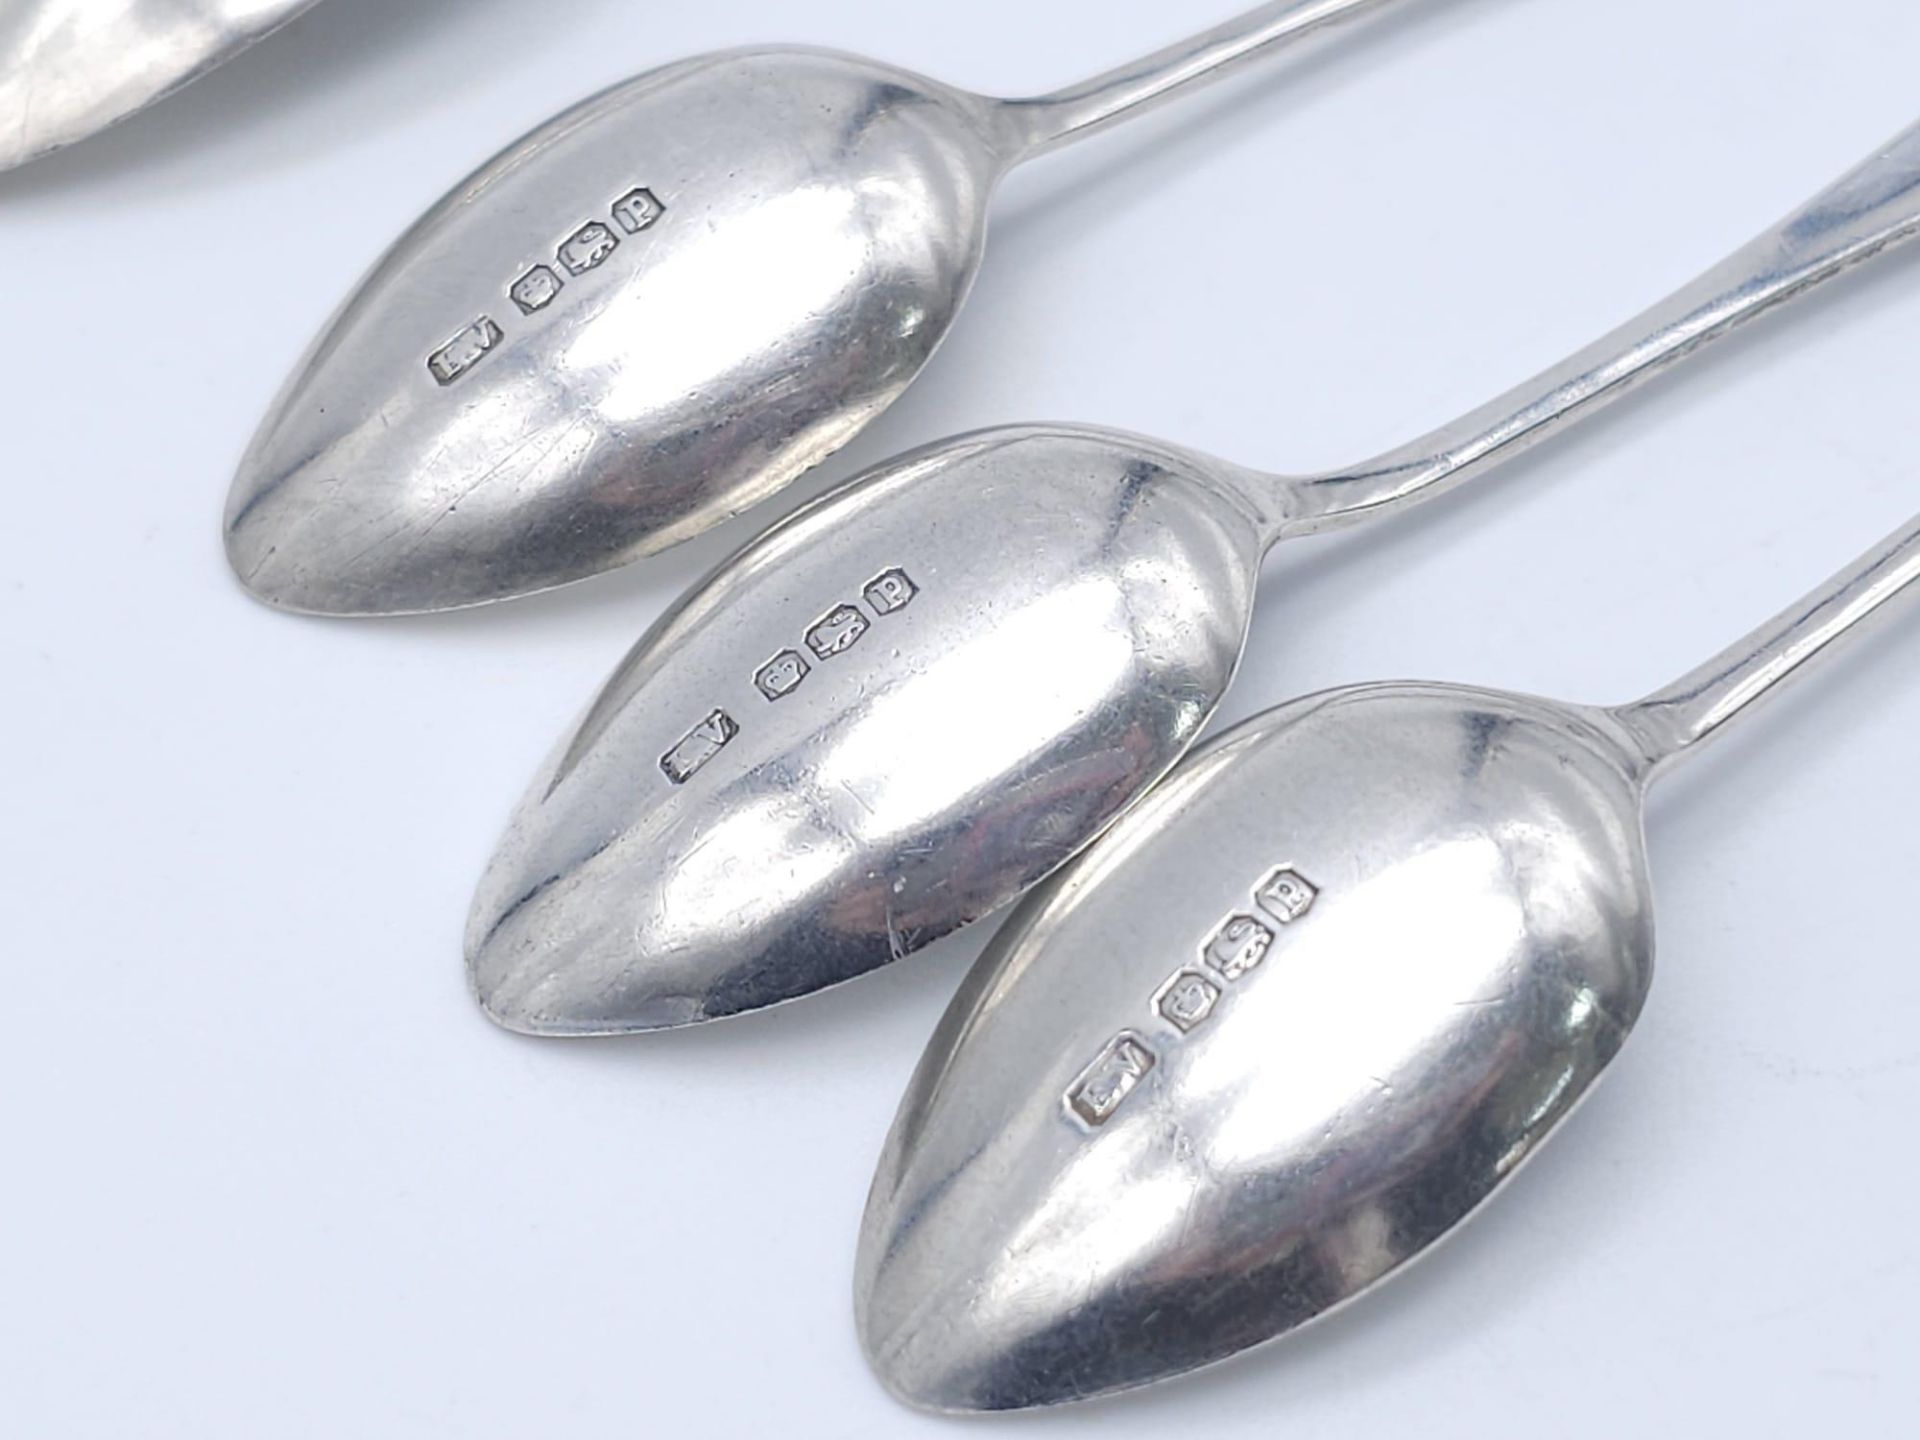 Collection of 5x silver spoons, Total Weight: 65.33g - Image 5 of 6